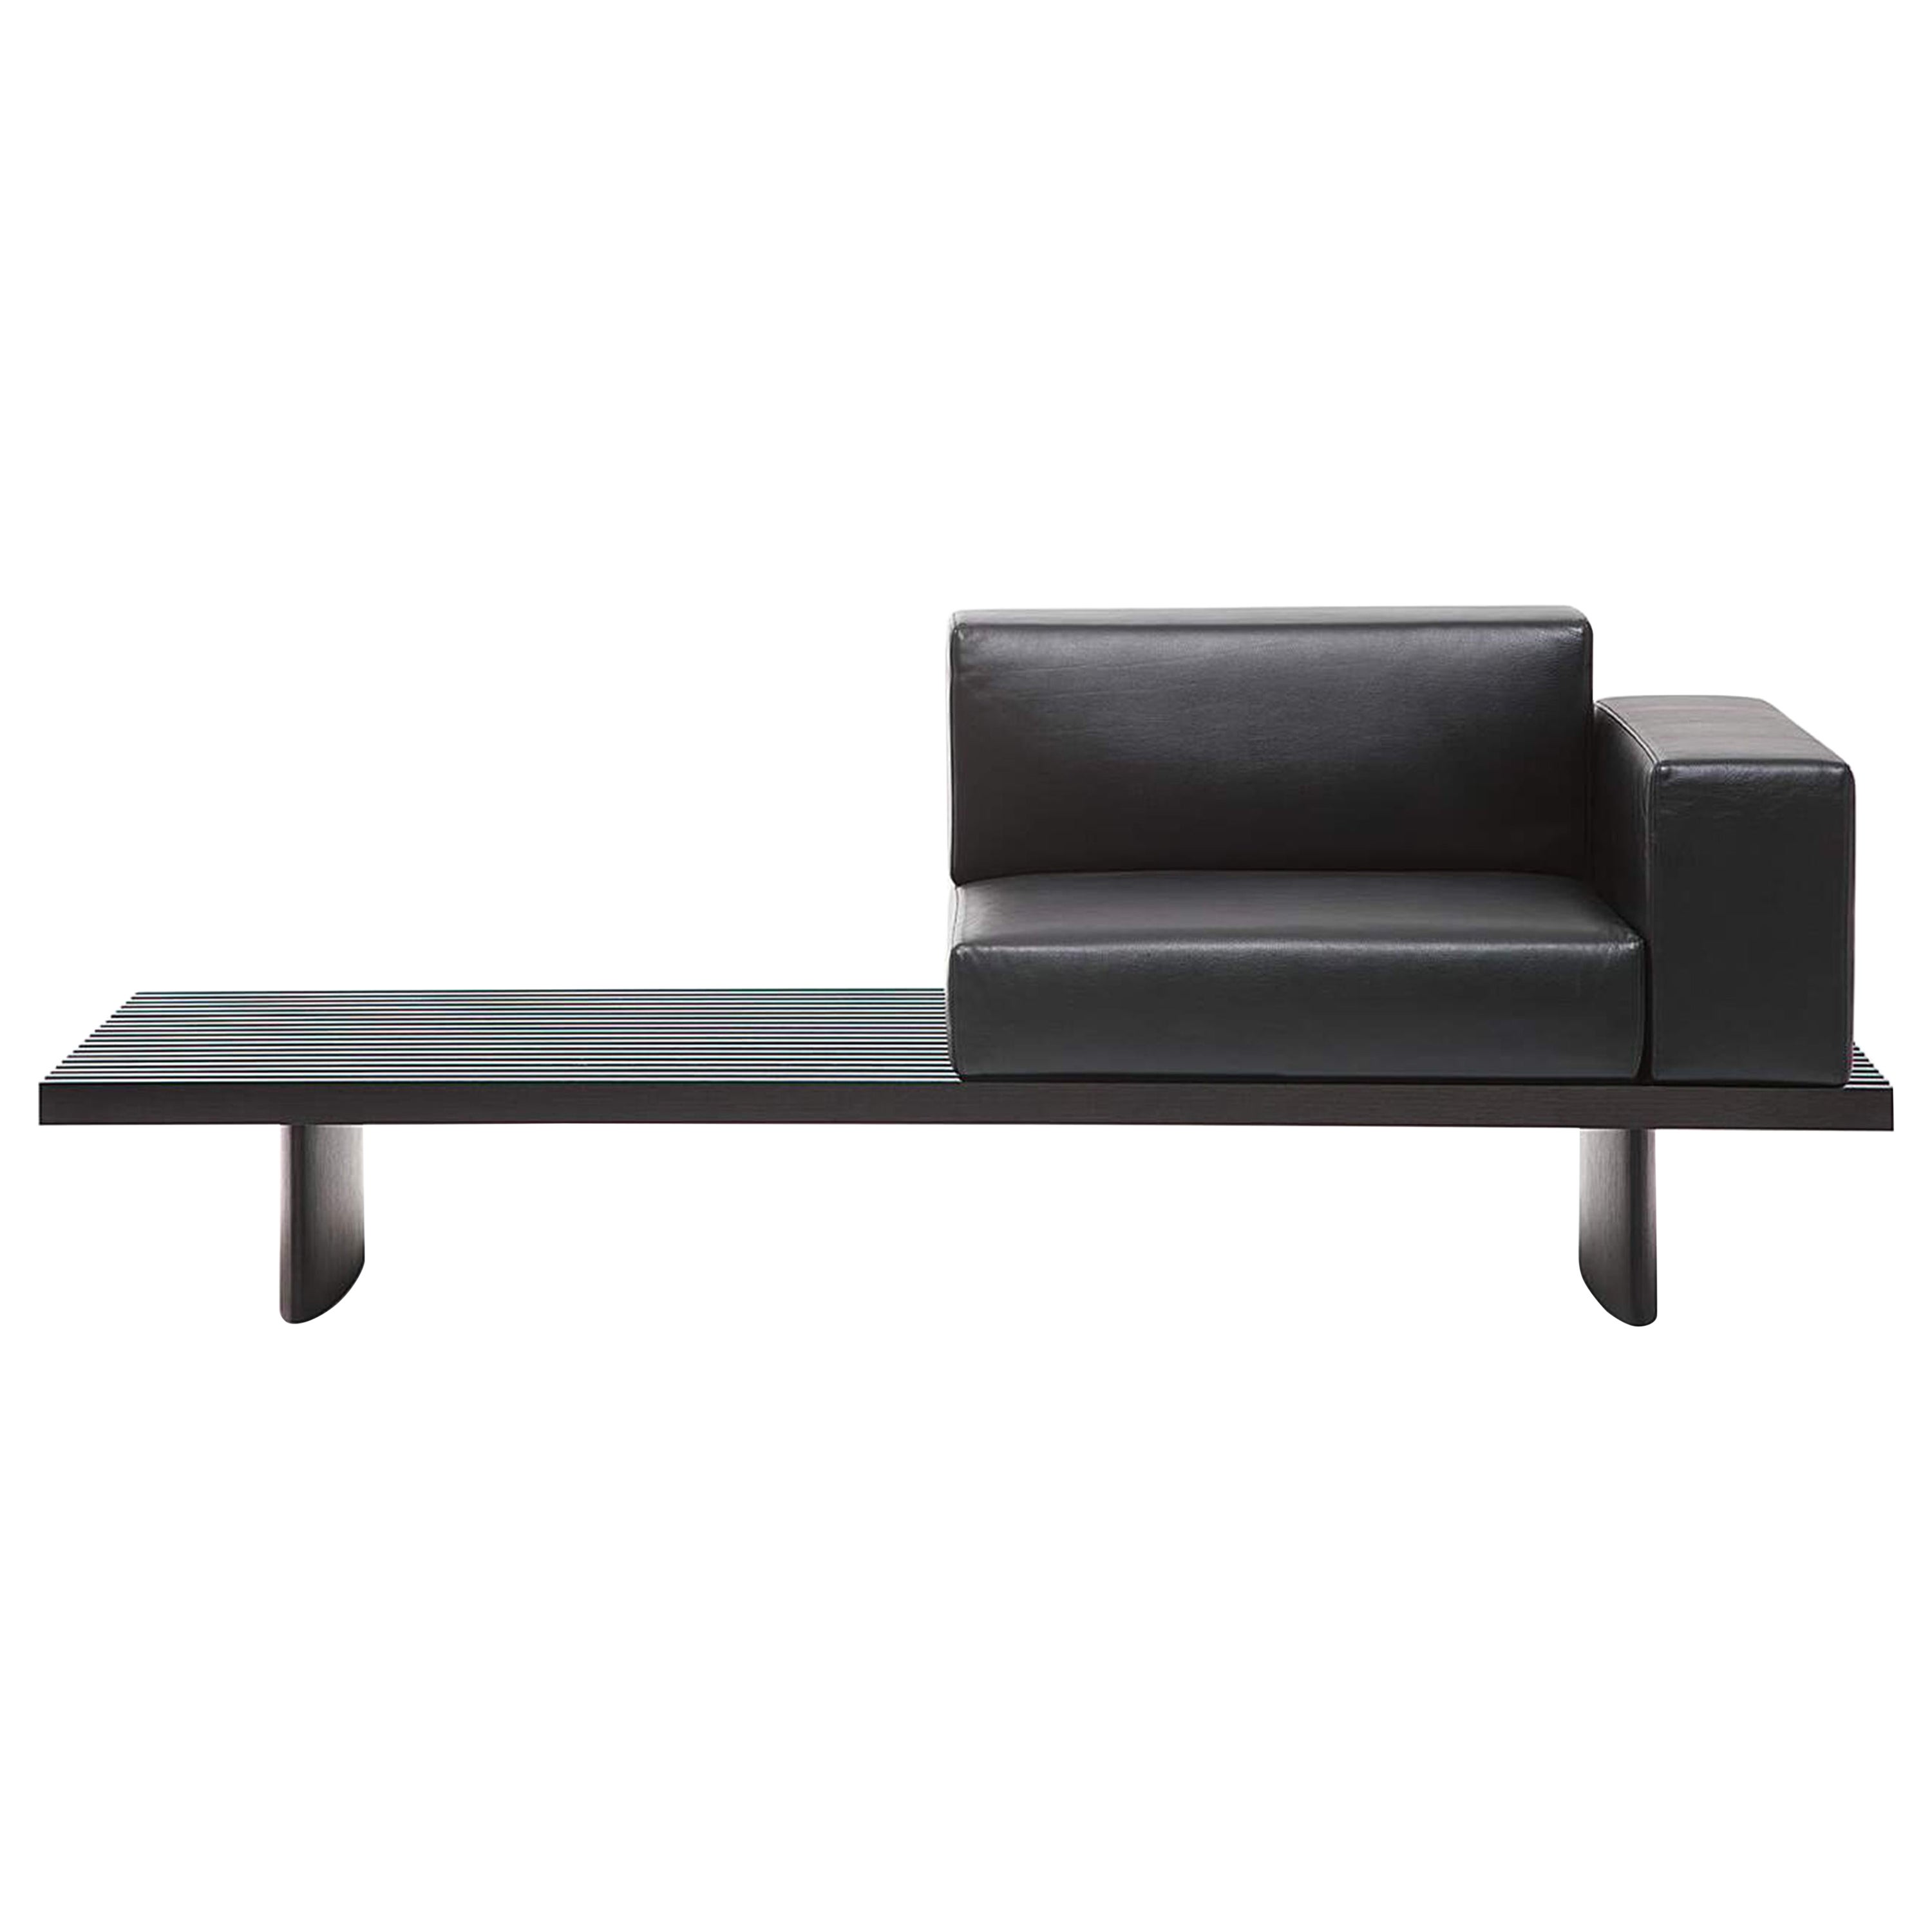 Charlotte Perriand Refolo Modular Sofa, Wood and Black Leather by Cassina